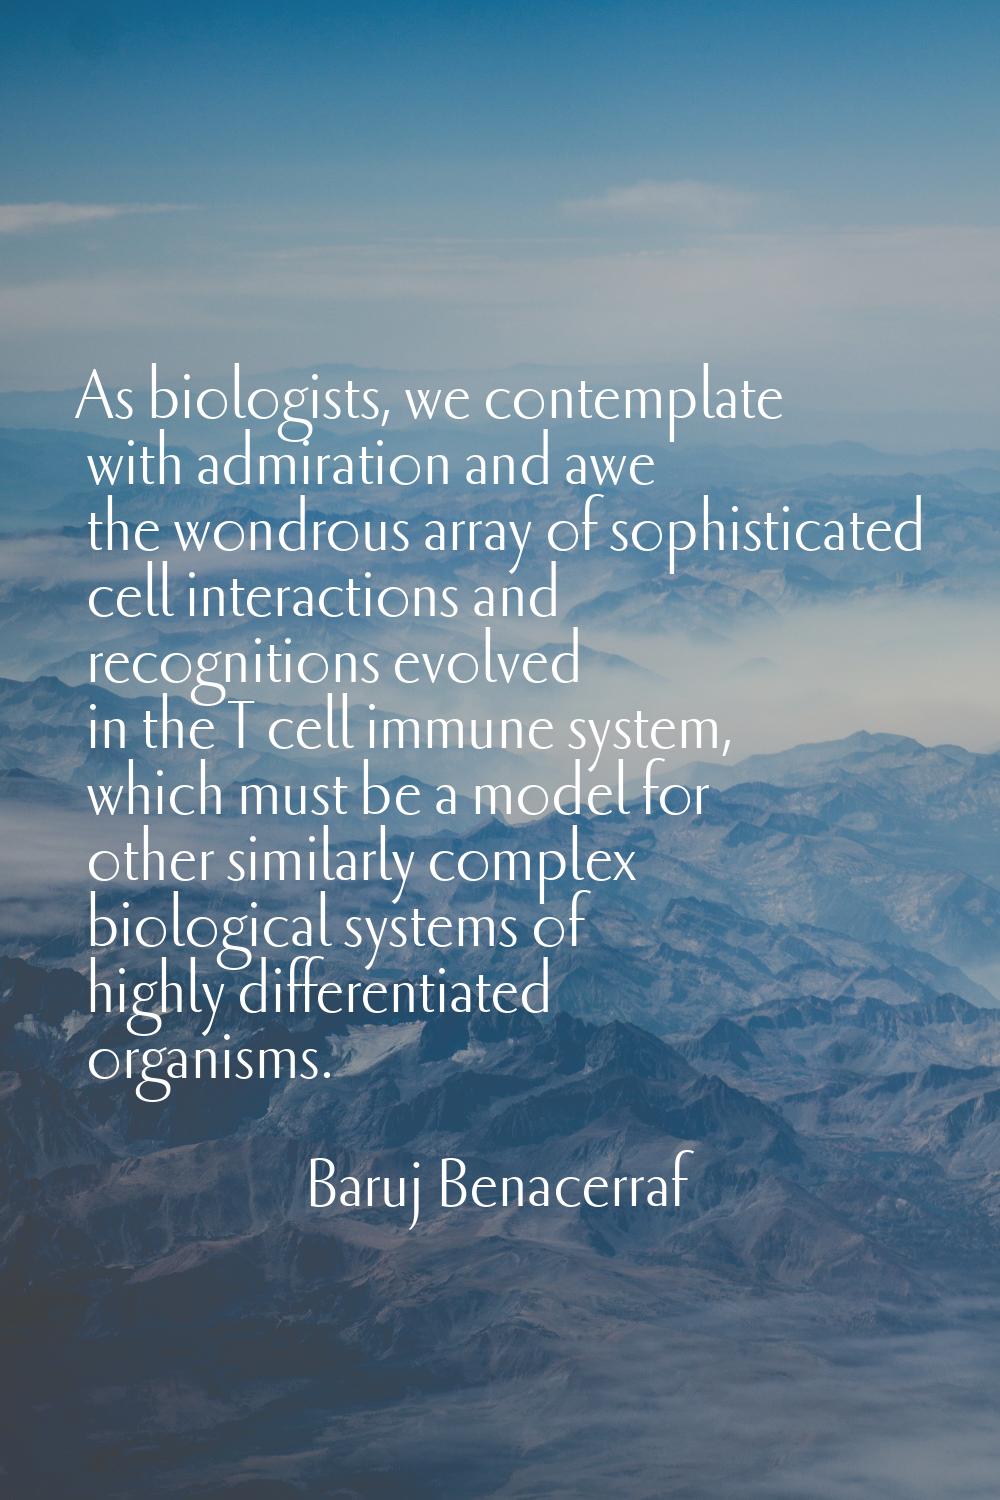 As biologists, we contemplate with admiration and awe the wondrous array of sophisticated cell inte